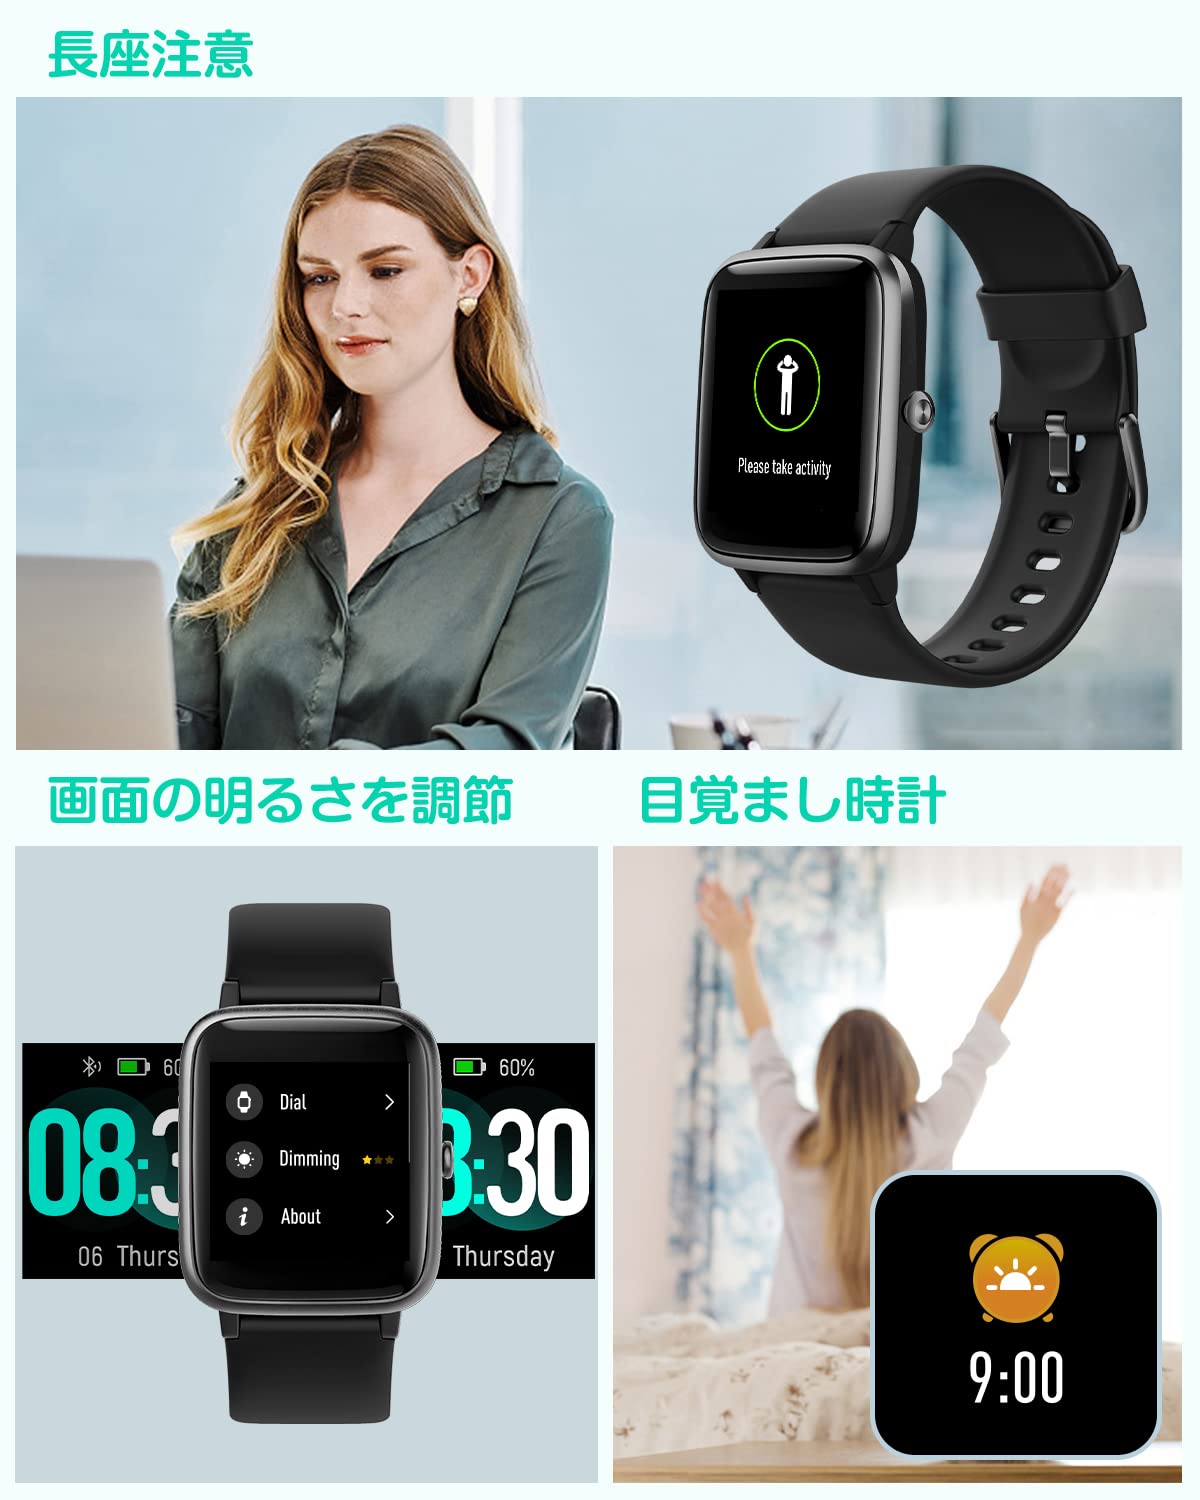 GRV Smart Watch, Activity Tracker, Pedometer, Stopwatch, Long Lasting Battery, Line, Incoming Call Notifications, Screen Brightness Adjustment, Timer, Stopwatch, Birthday, Respect for the Aged Day, IP68 Waterproof, Japanese App, Instruction Manual (Englis